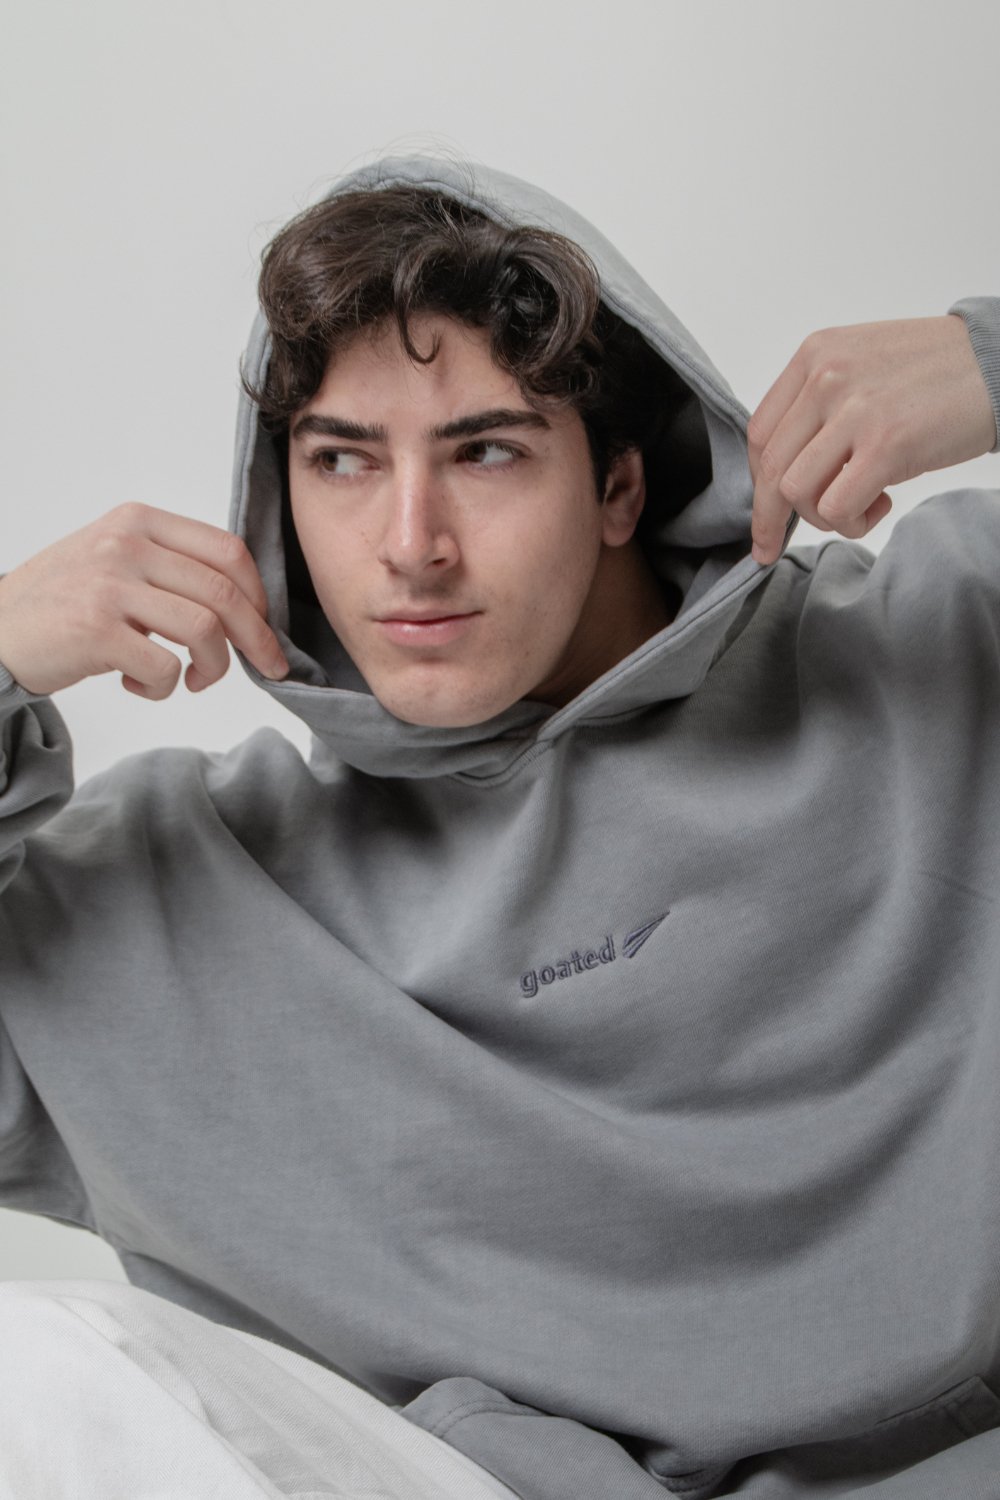 Contactless Hoodie - Ash Grey - 2401AW21NF035100S